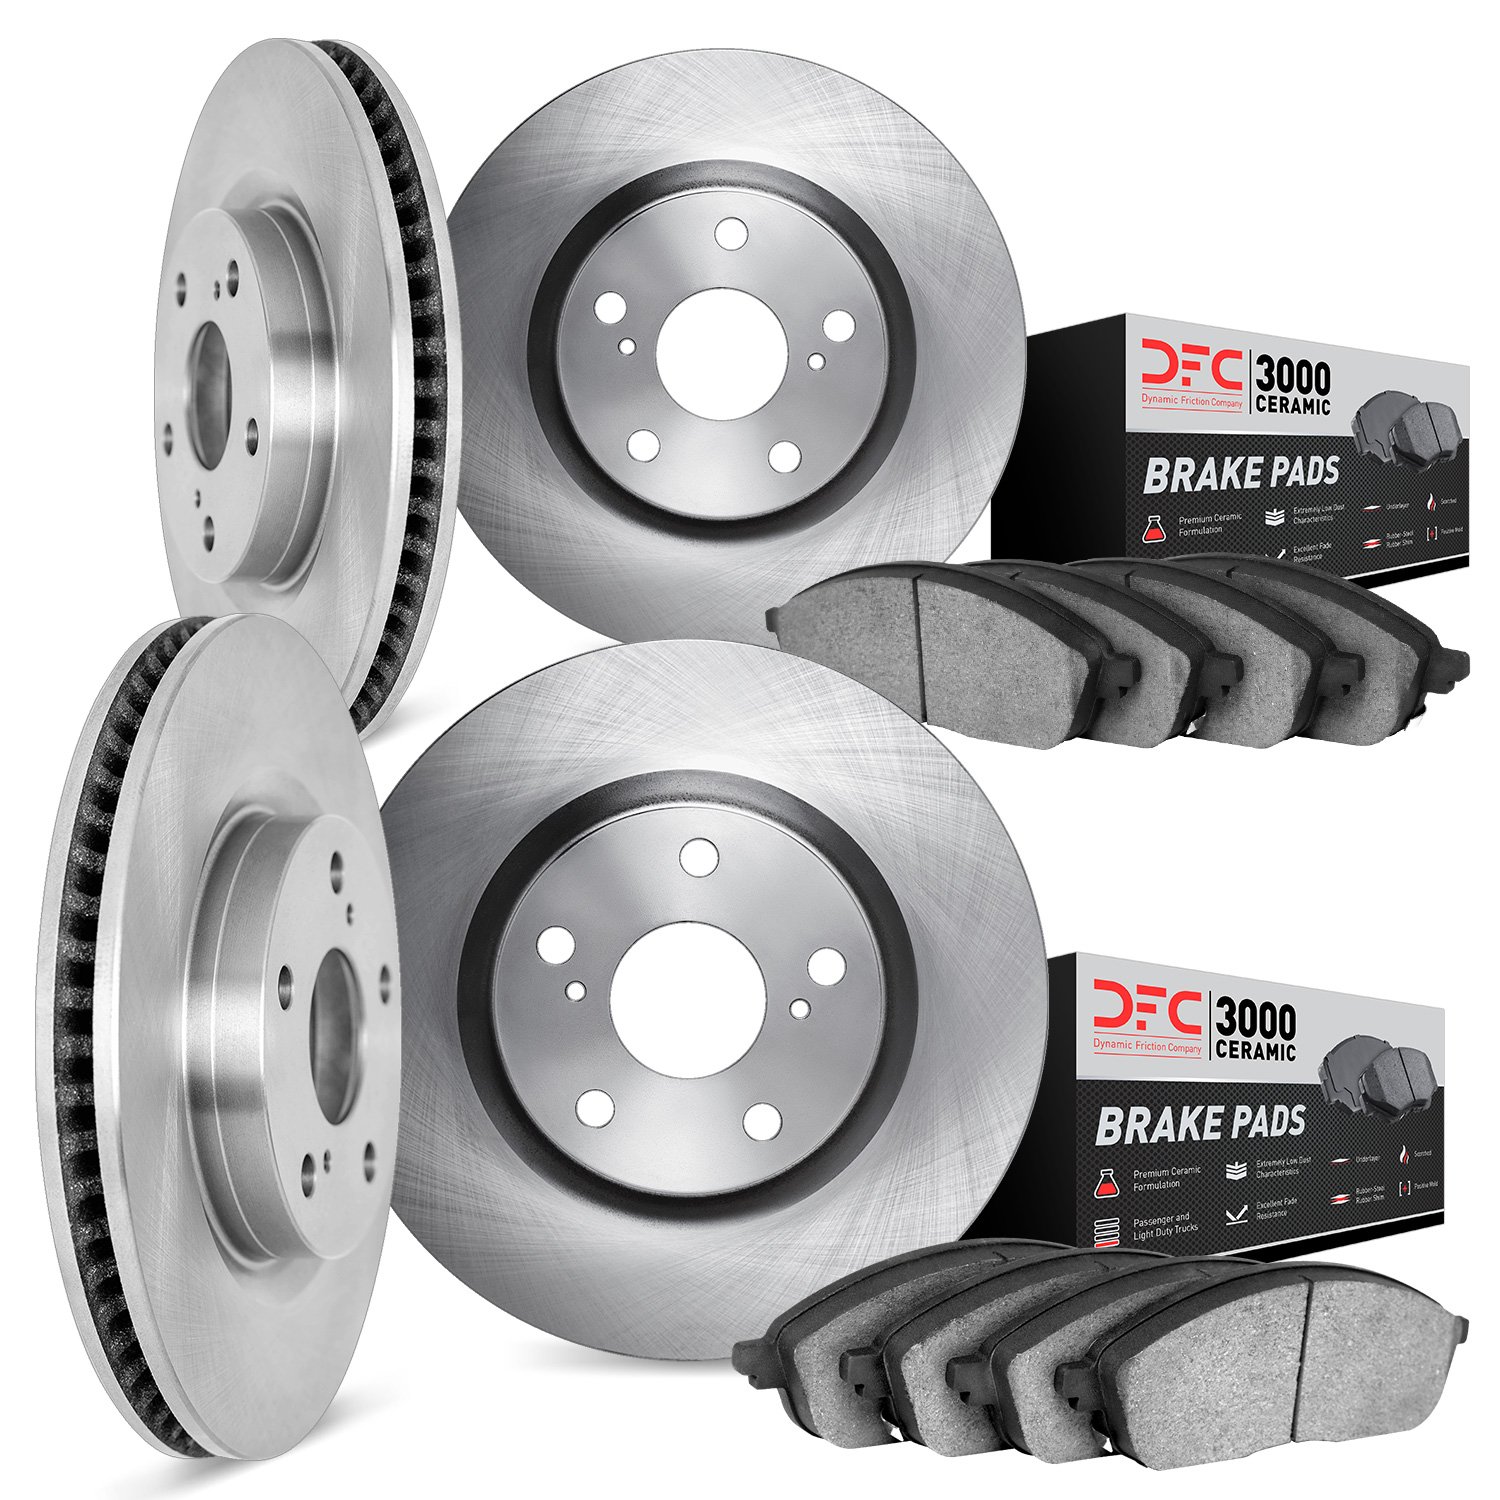 6304-67056 Brake Rotors with 3000-Series Ceramic Brake Pads Kit, 2003-2011 Infiniti/Nissan, Position: Front and Rear